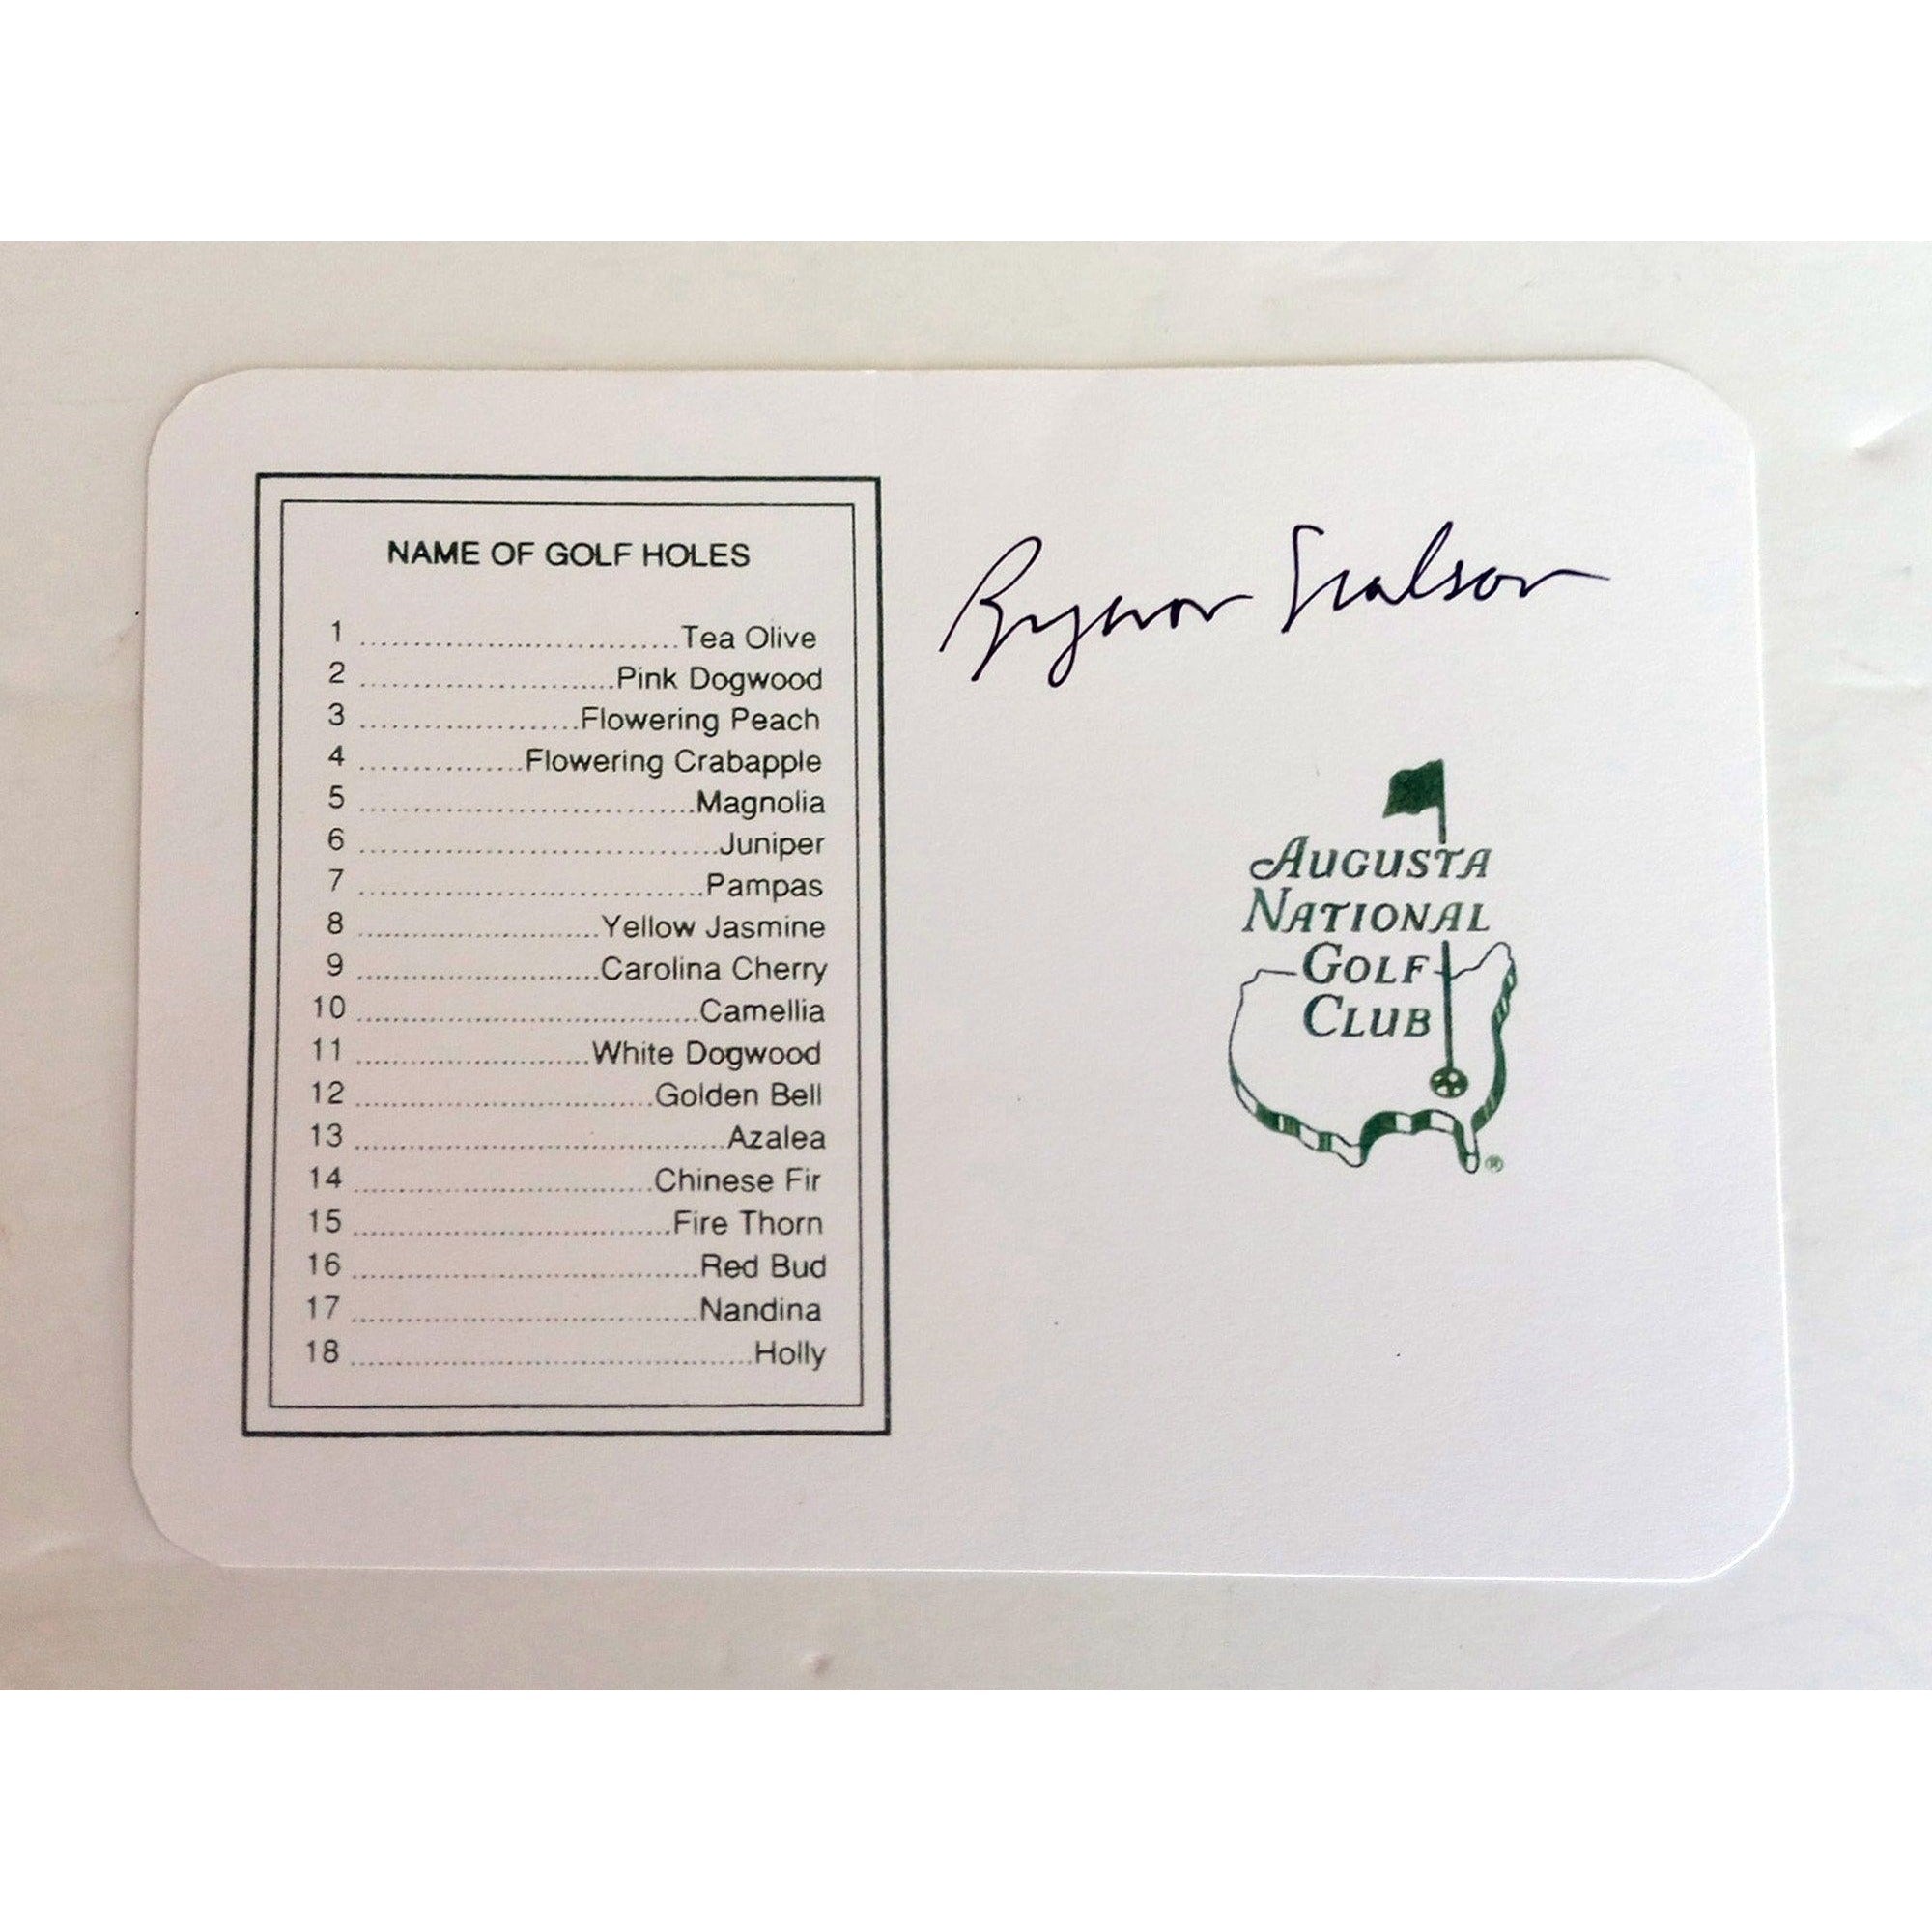 Byron Nelson Masters scorecard signed with proof